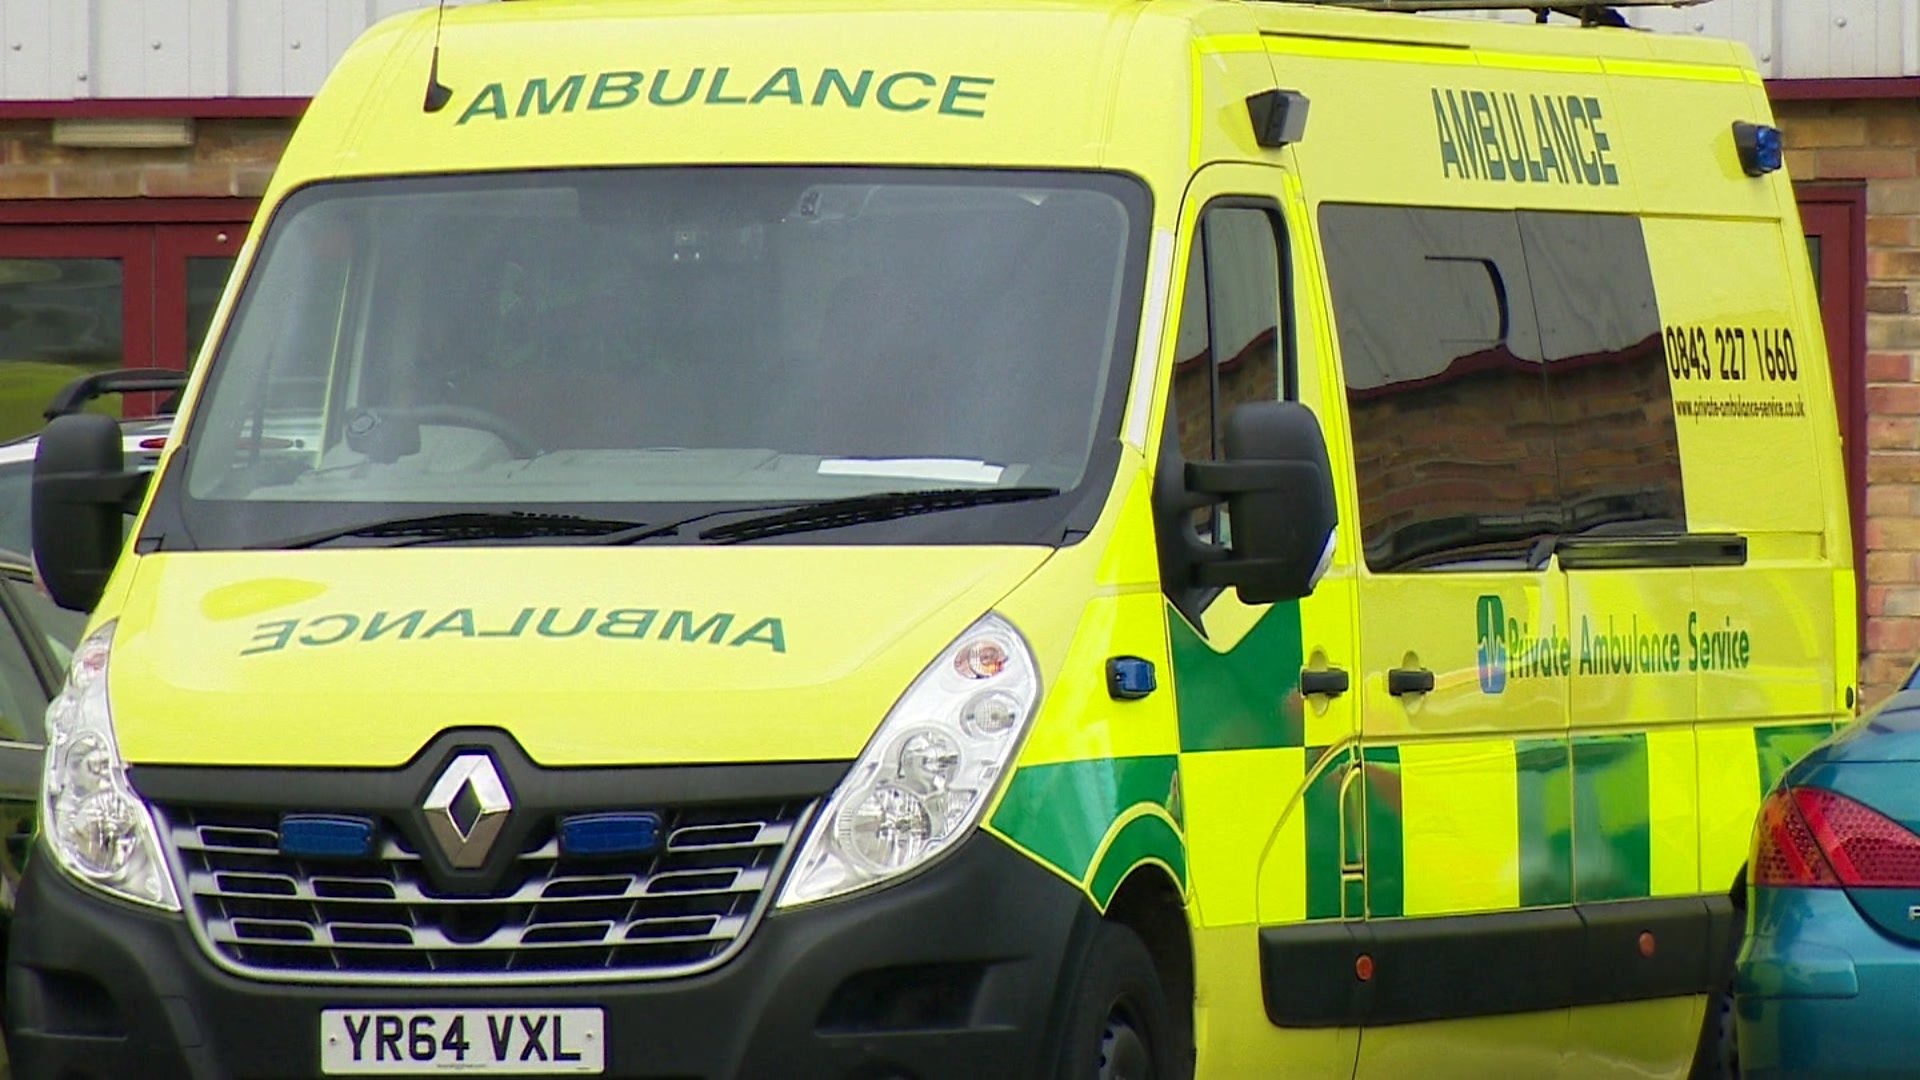 1920x1080 BBC Two - Victoria Derbyshire, 'An hour's training to drive an ambulance'